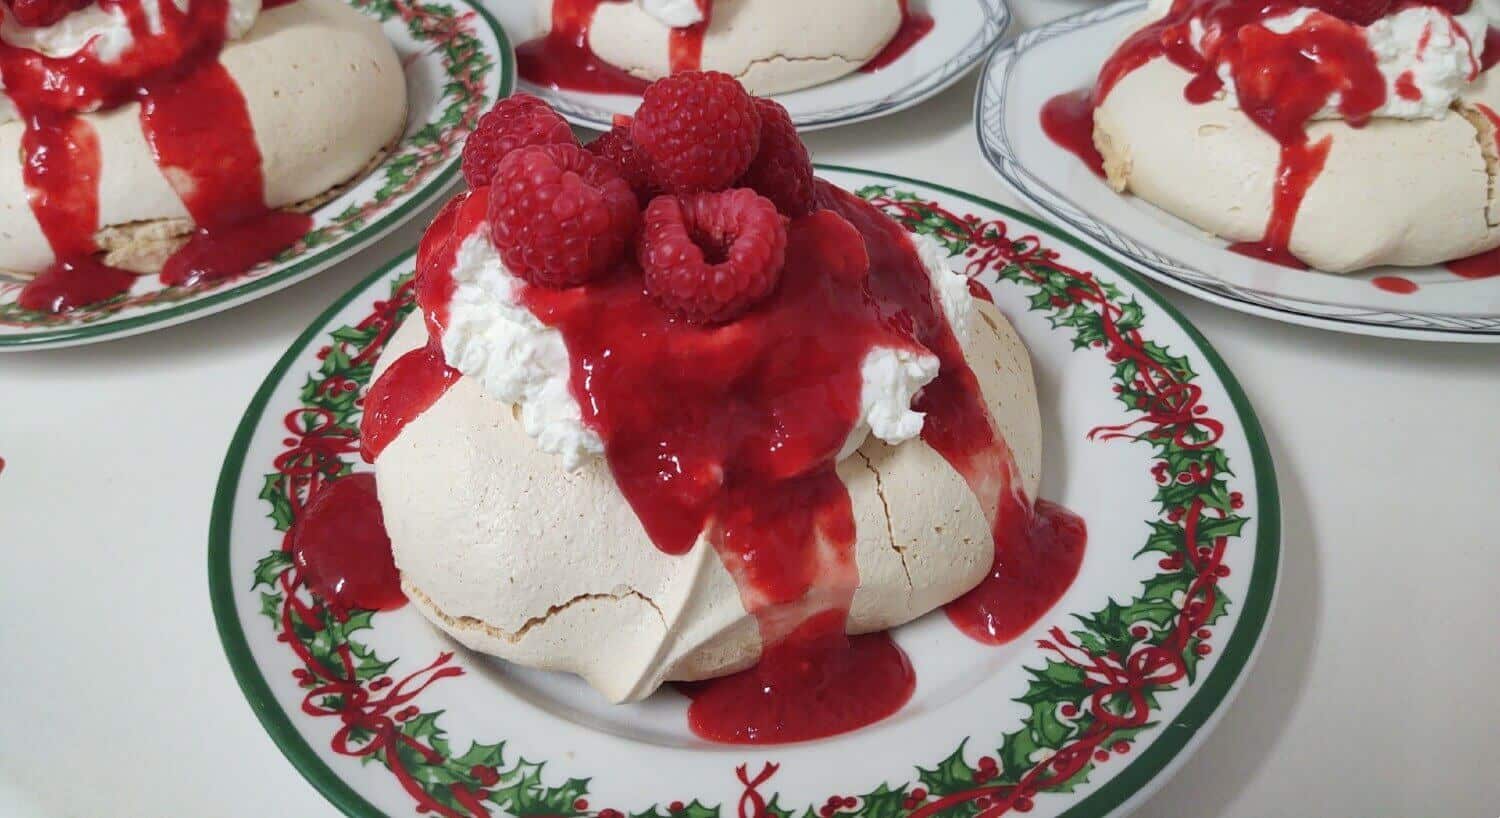 small Christmas plates with a white meringue tart covered with whipped cream, red sauce and raspberries